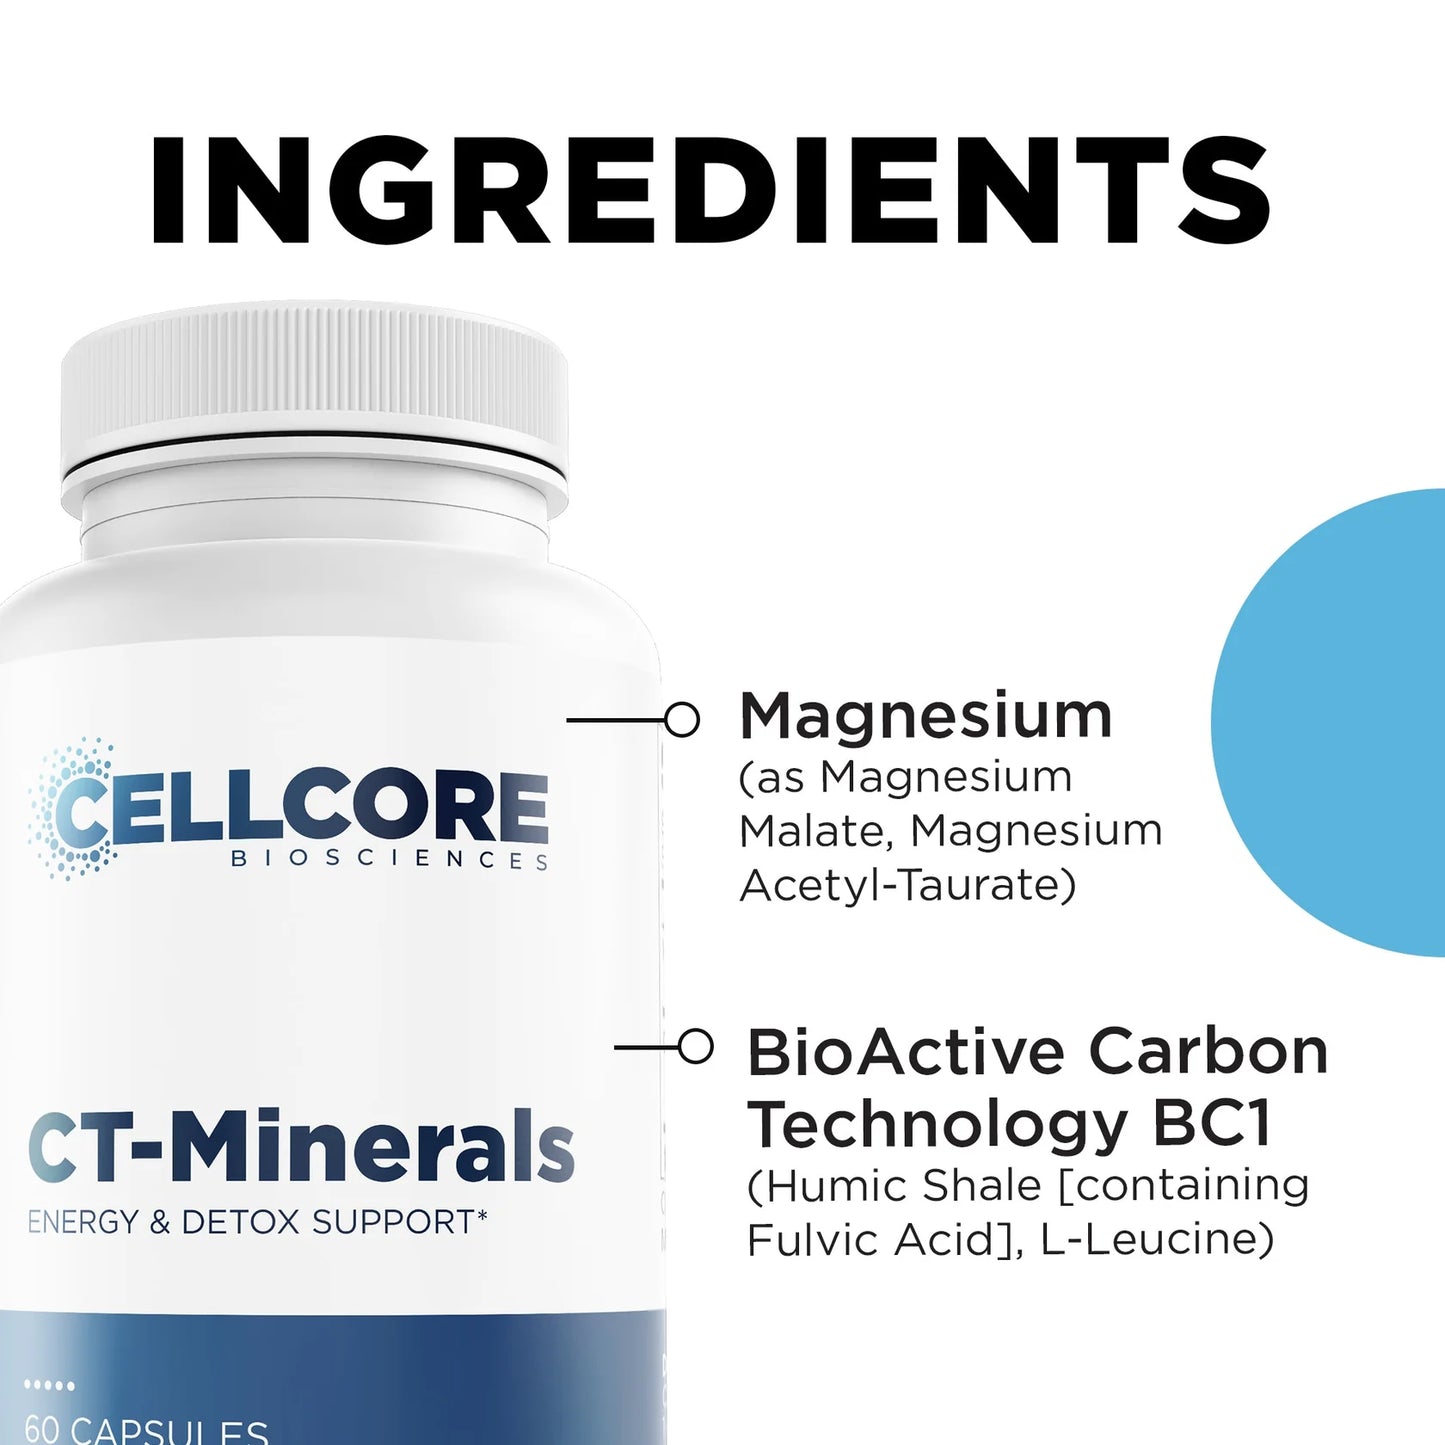 CT Minerals by Cellcore